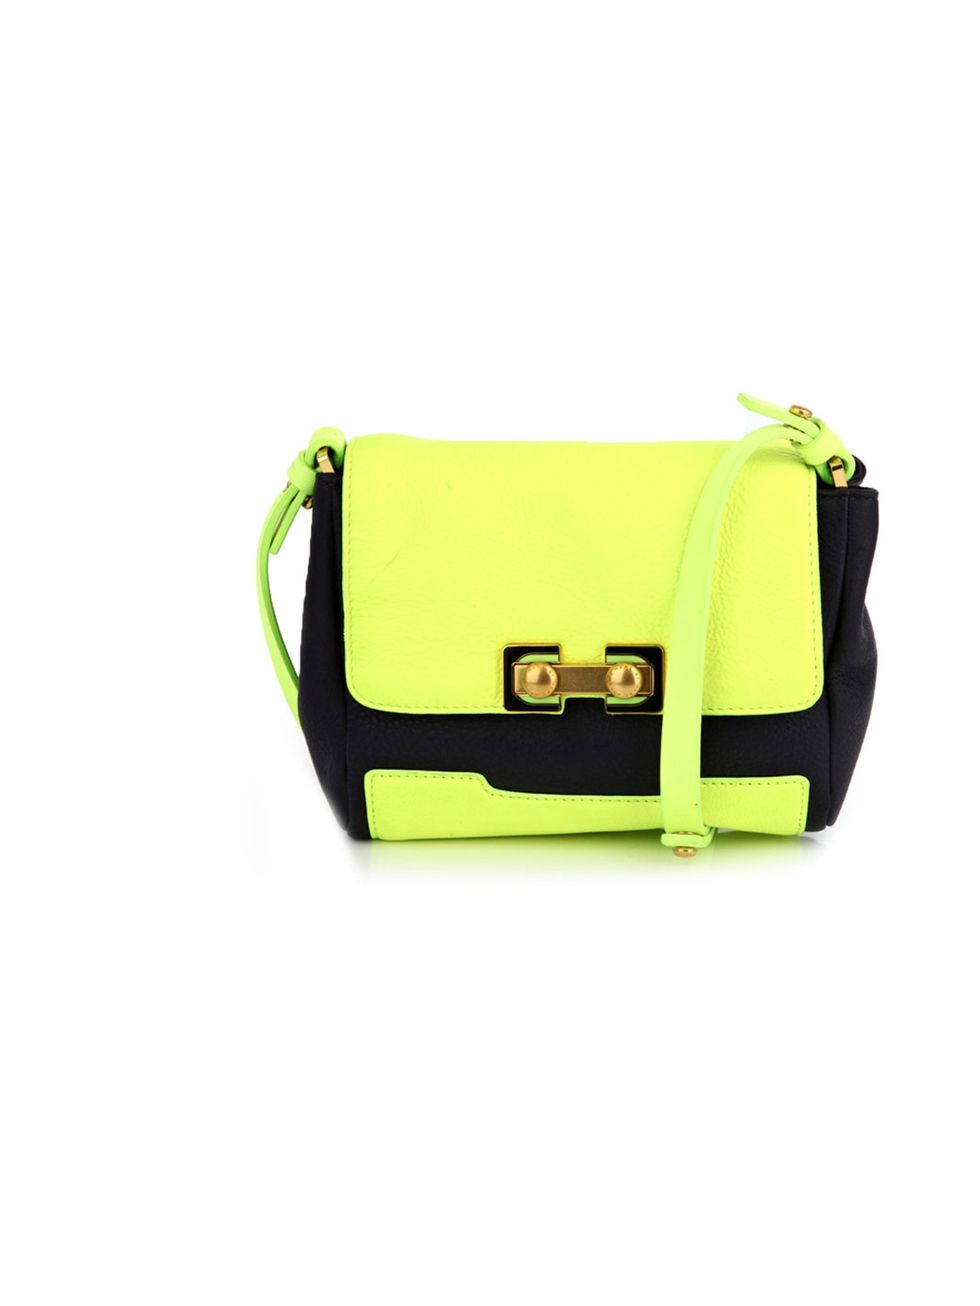 <p>Marc by Marc Jacobs neon bag, £182 (was £260), at <a href="http://www.matchesfashion.com/product/54564">Matches Fashion</a></p>